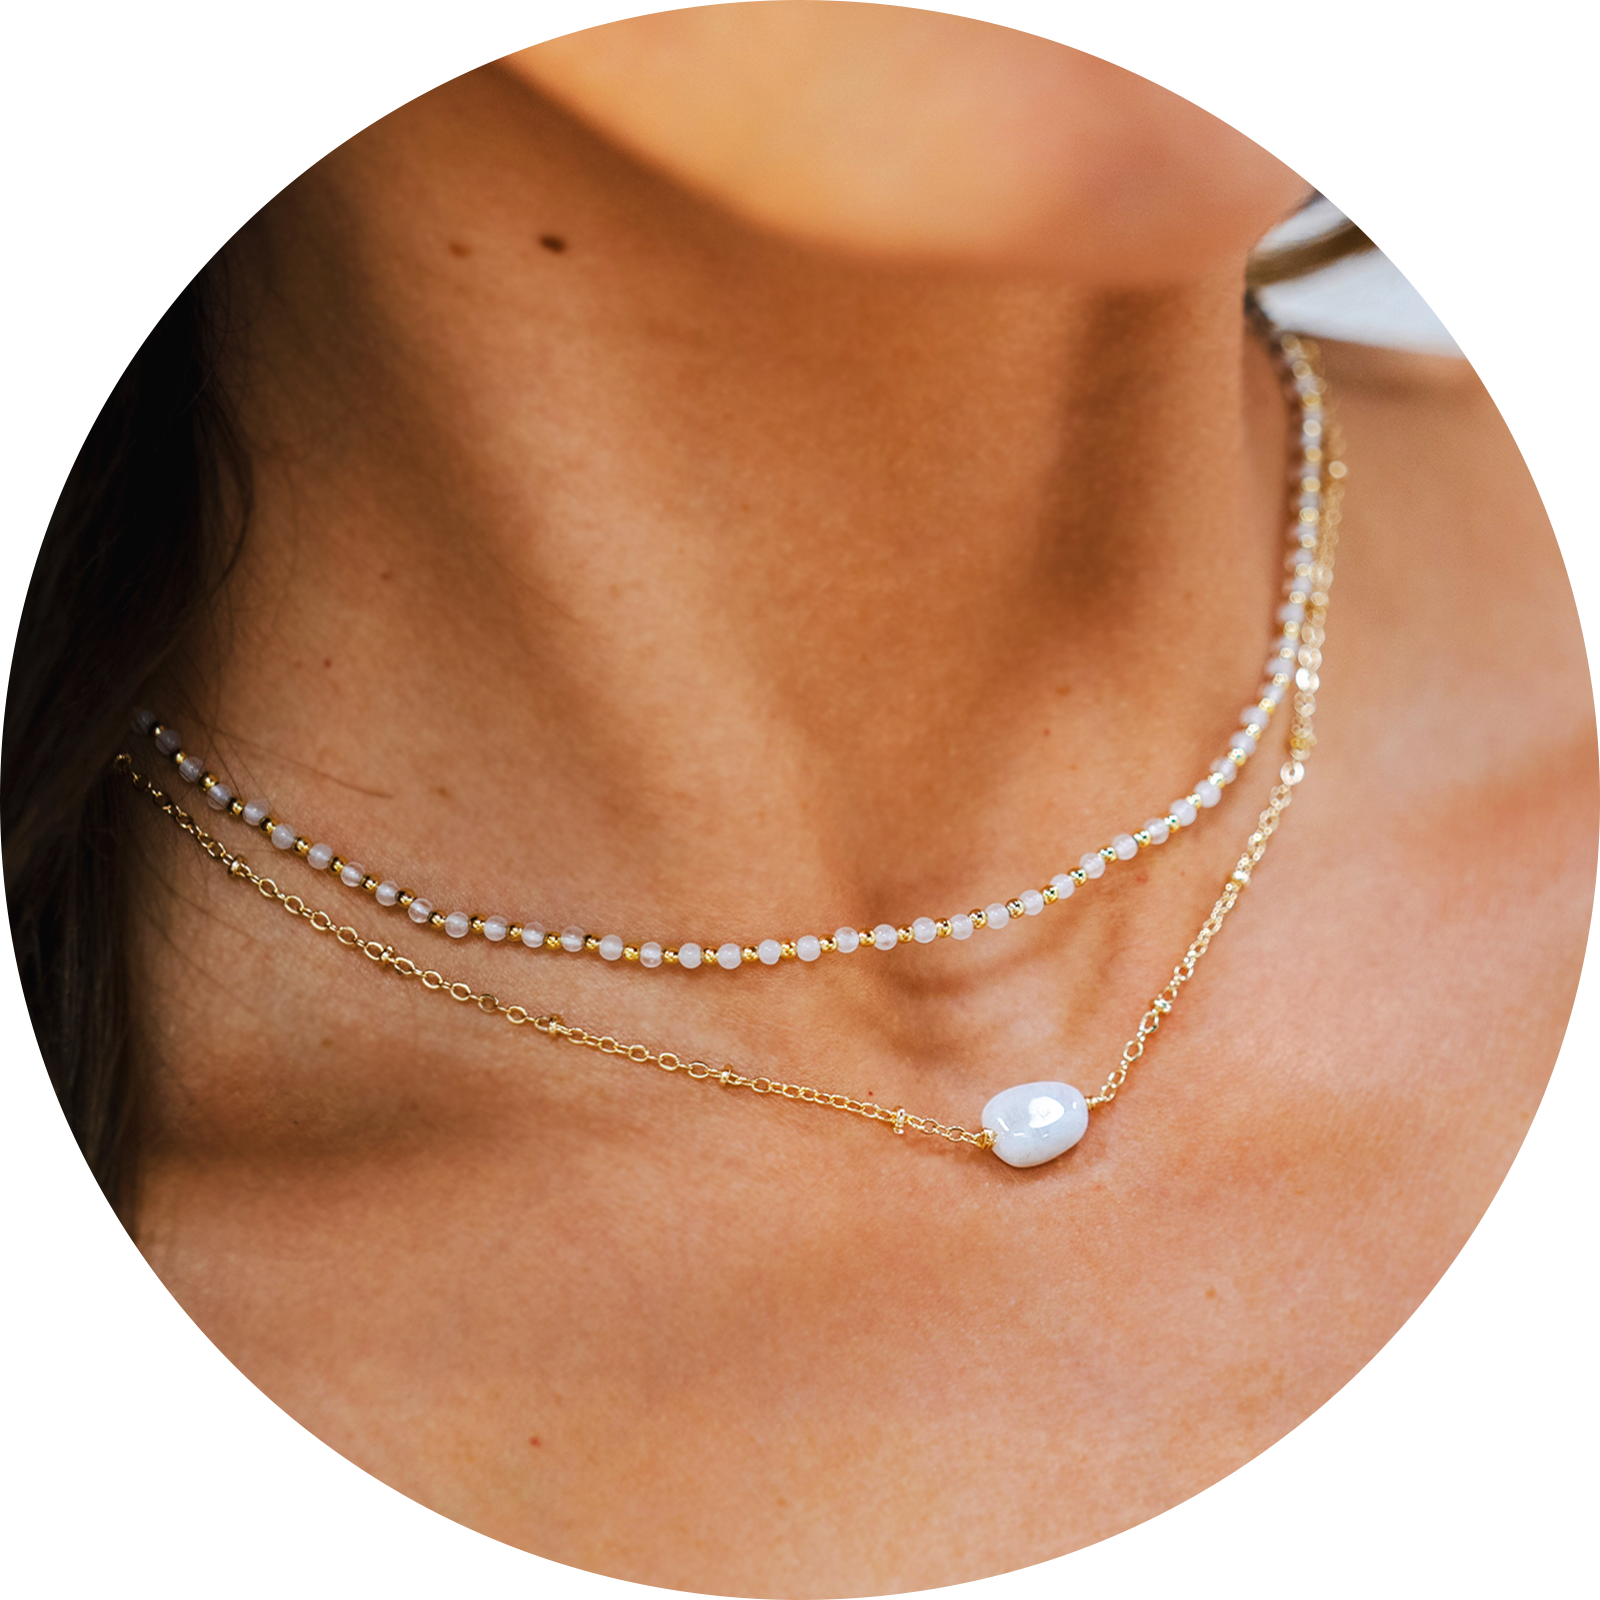 Model wearing a necklace stack. The stack consists of a 2mm moonstone and gold bead healing necklace and a moonstone healing necklace with a gold chain